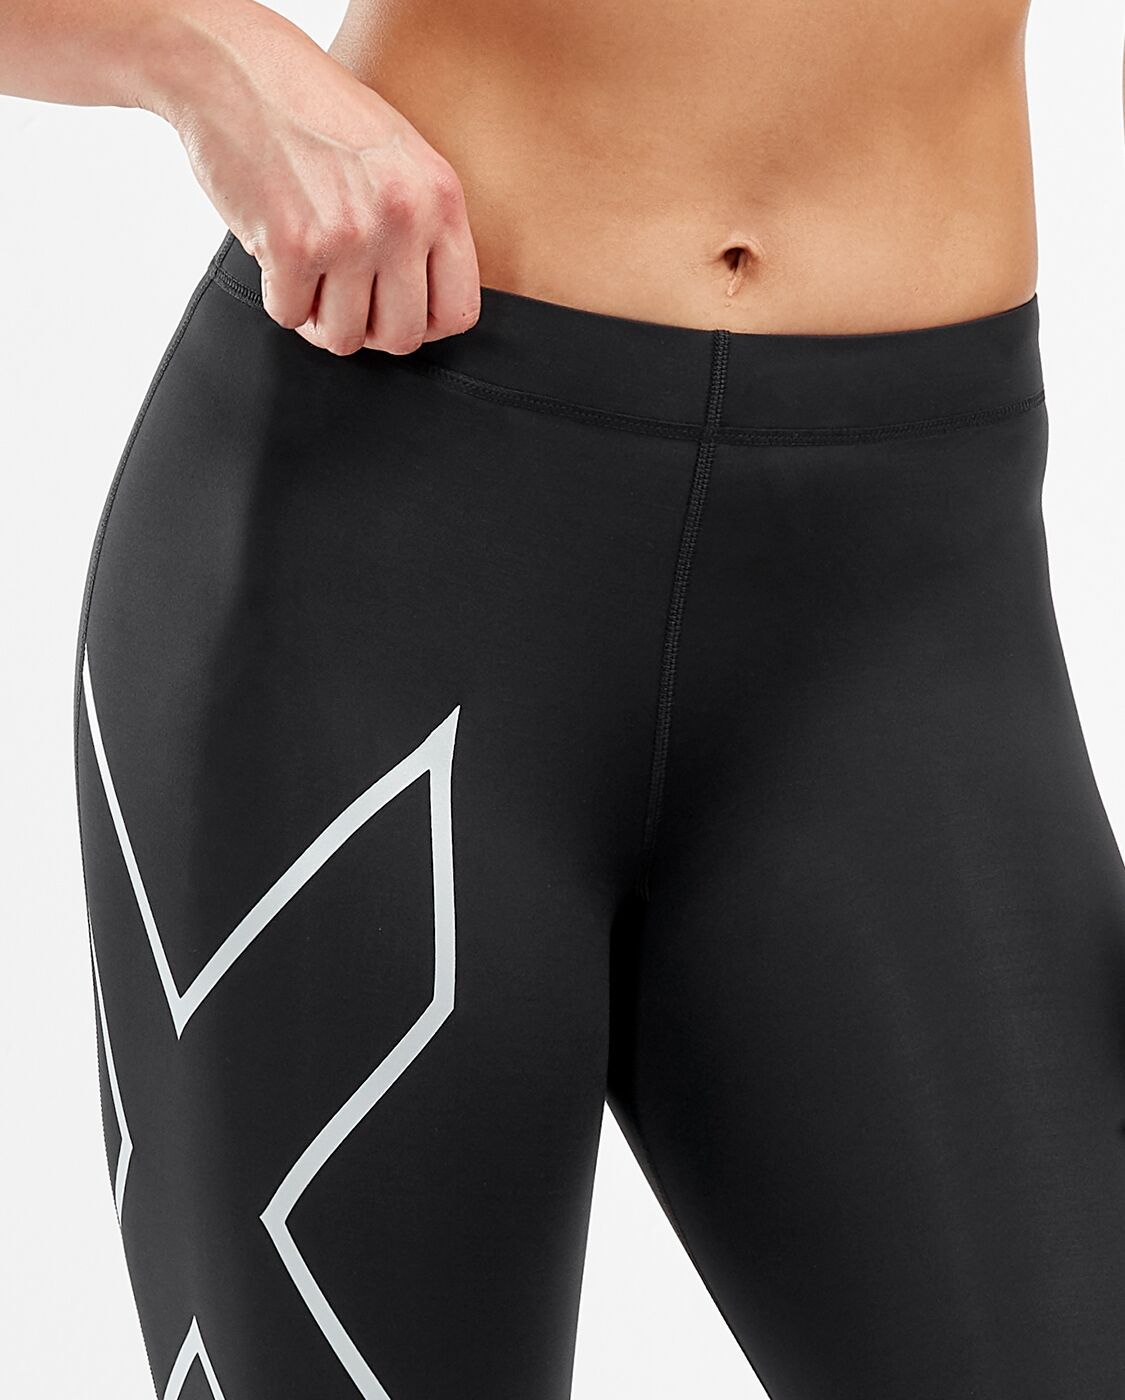 2XU South Africa - Women's Core Compression Tights - Black/Silver